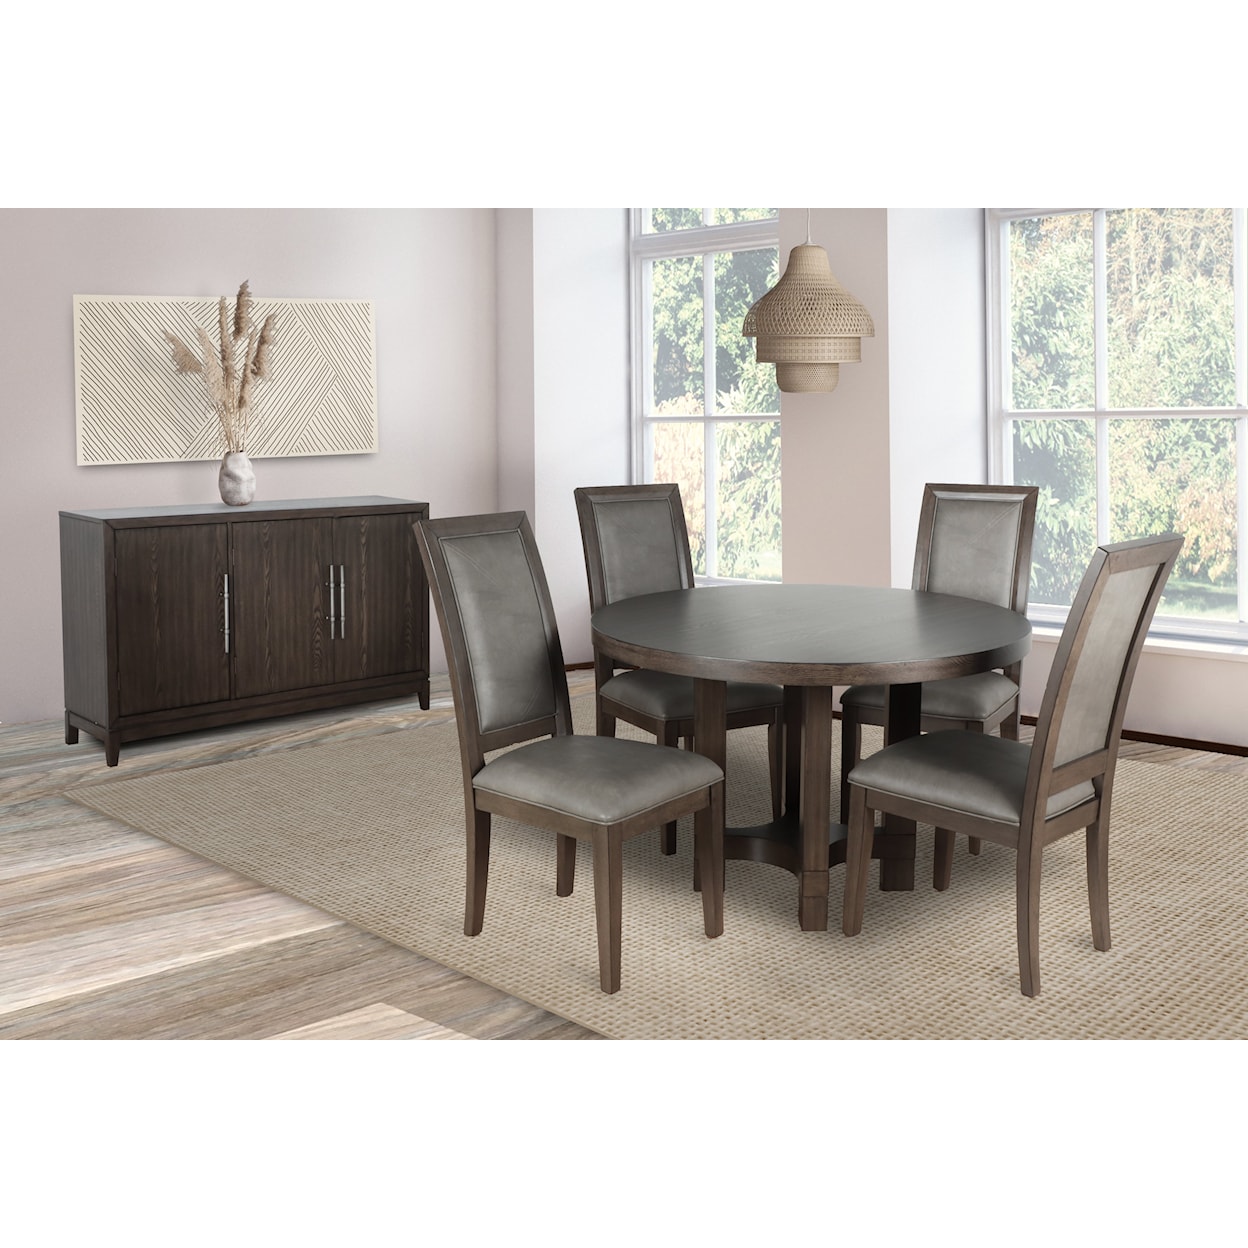 New Classic Cityscape Dining Room Set